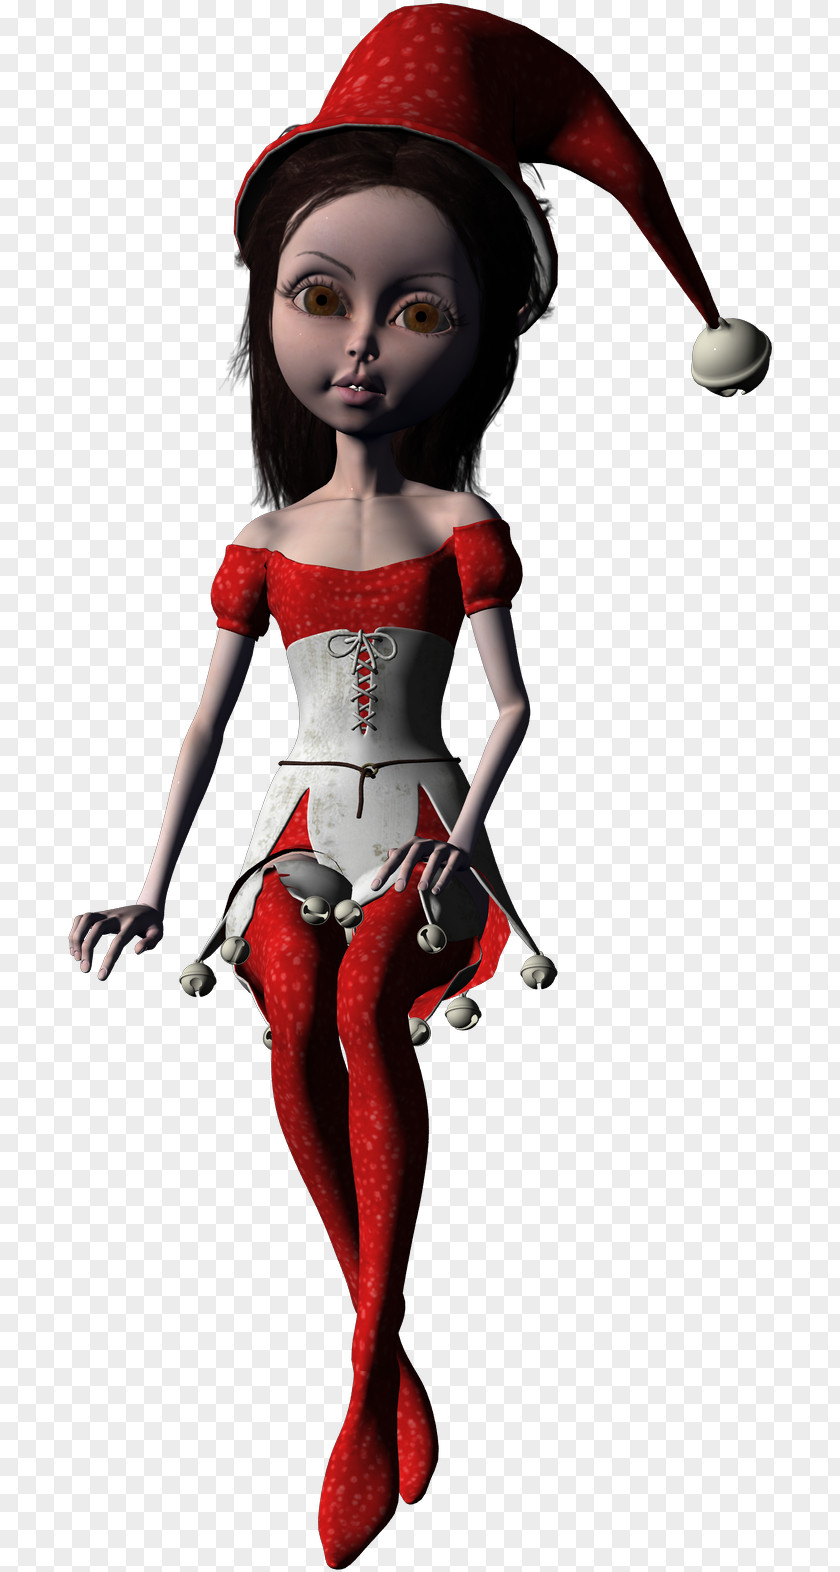 Doll Legendary Creature PNG